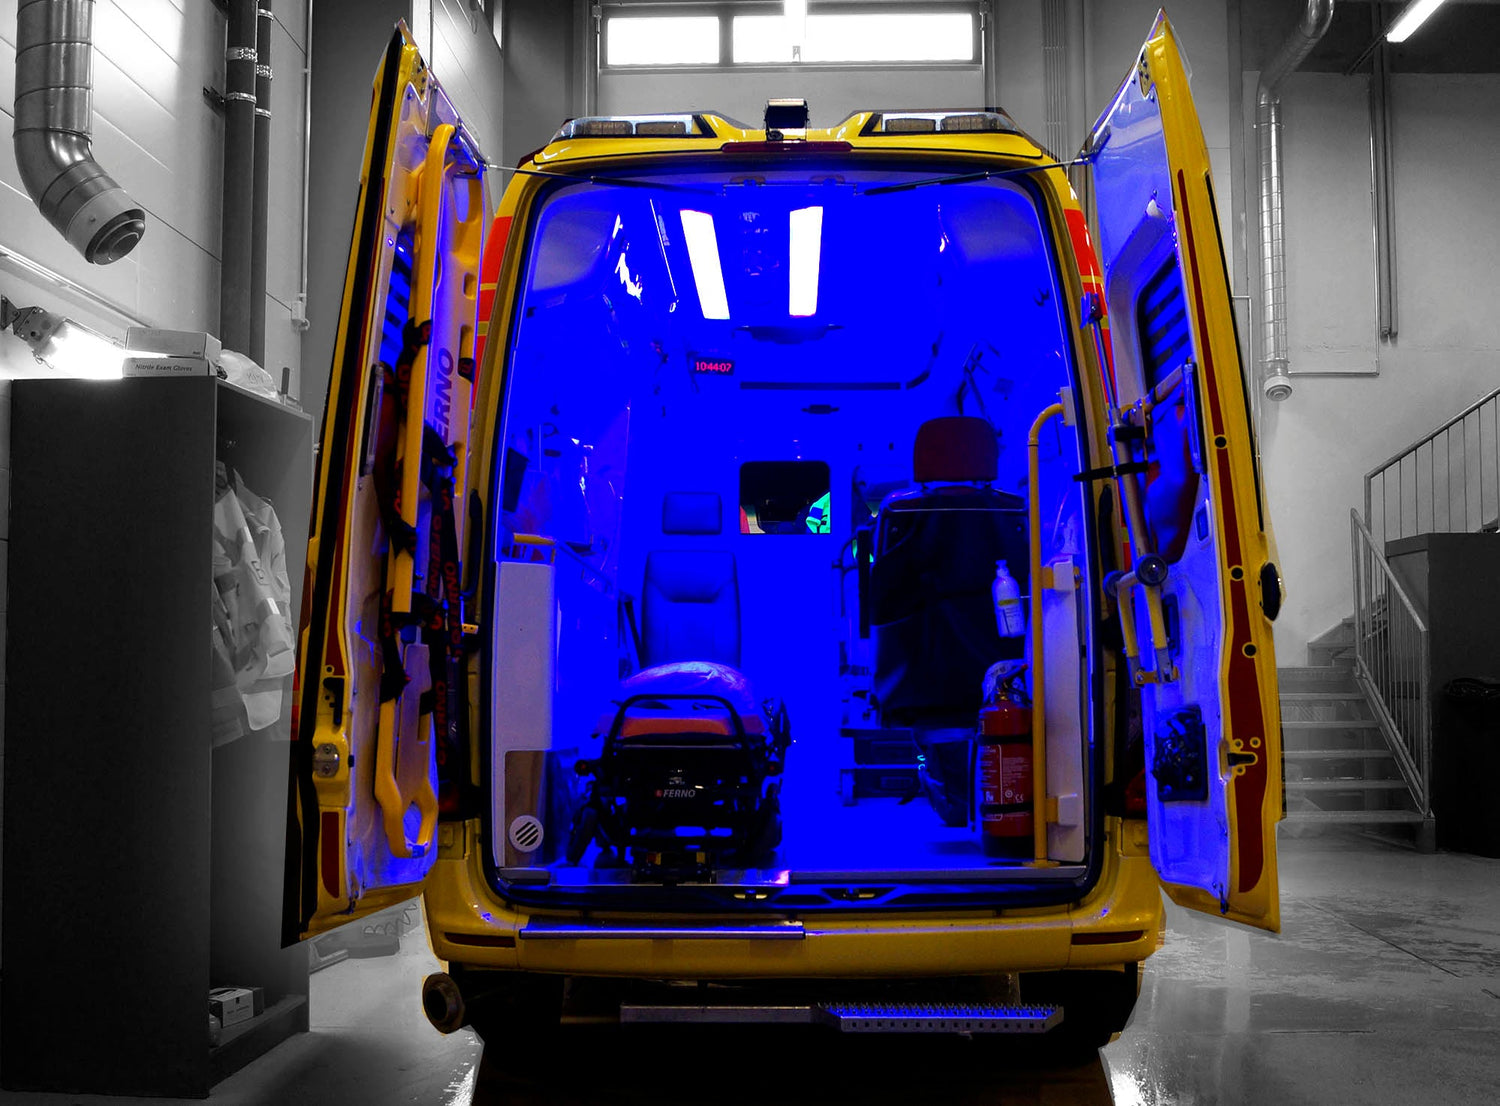 Ambulance patient compartment equipped with Spectral Blue disinfection system